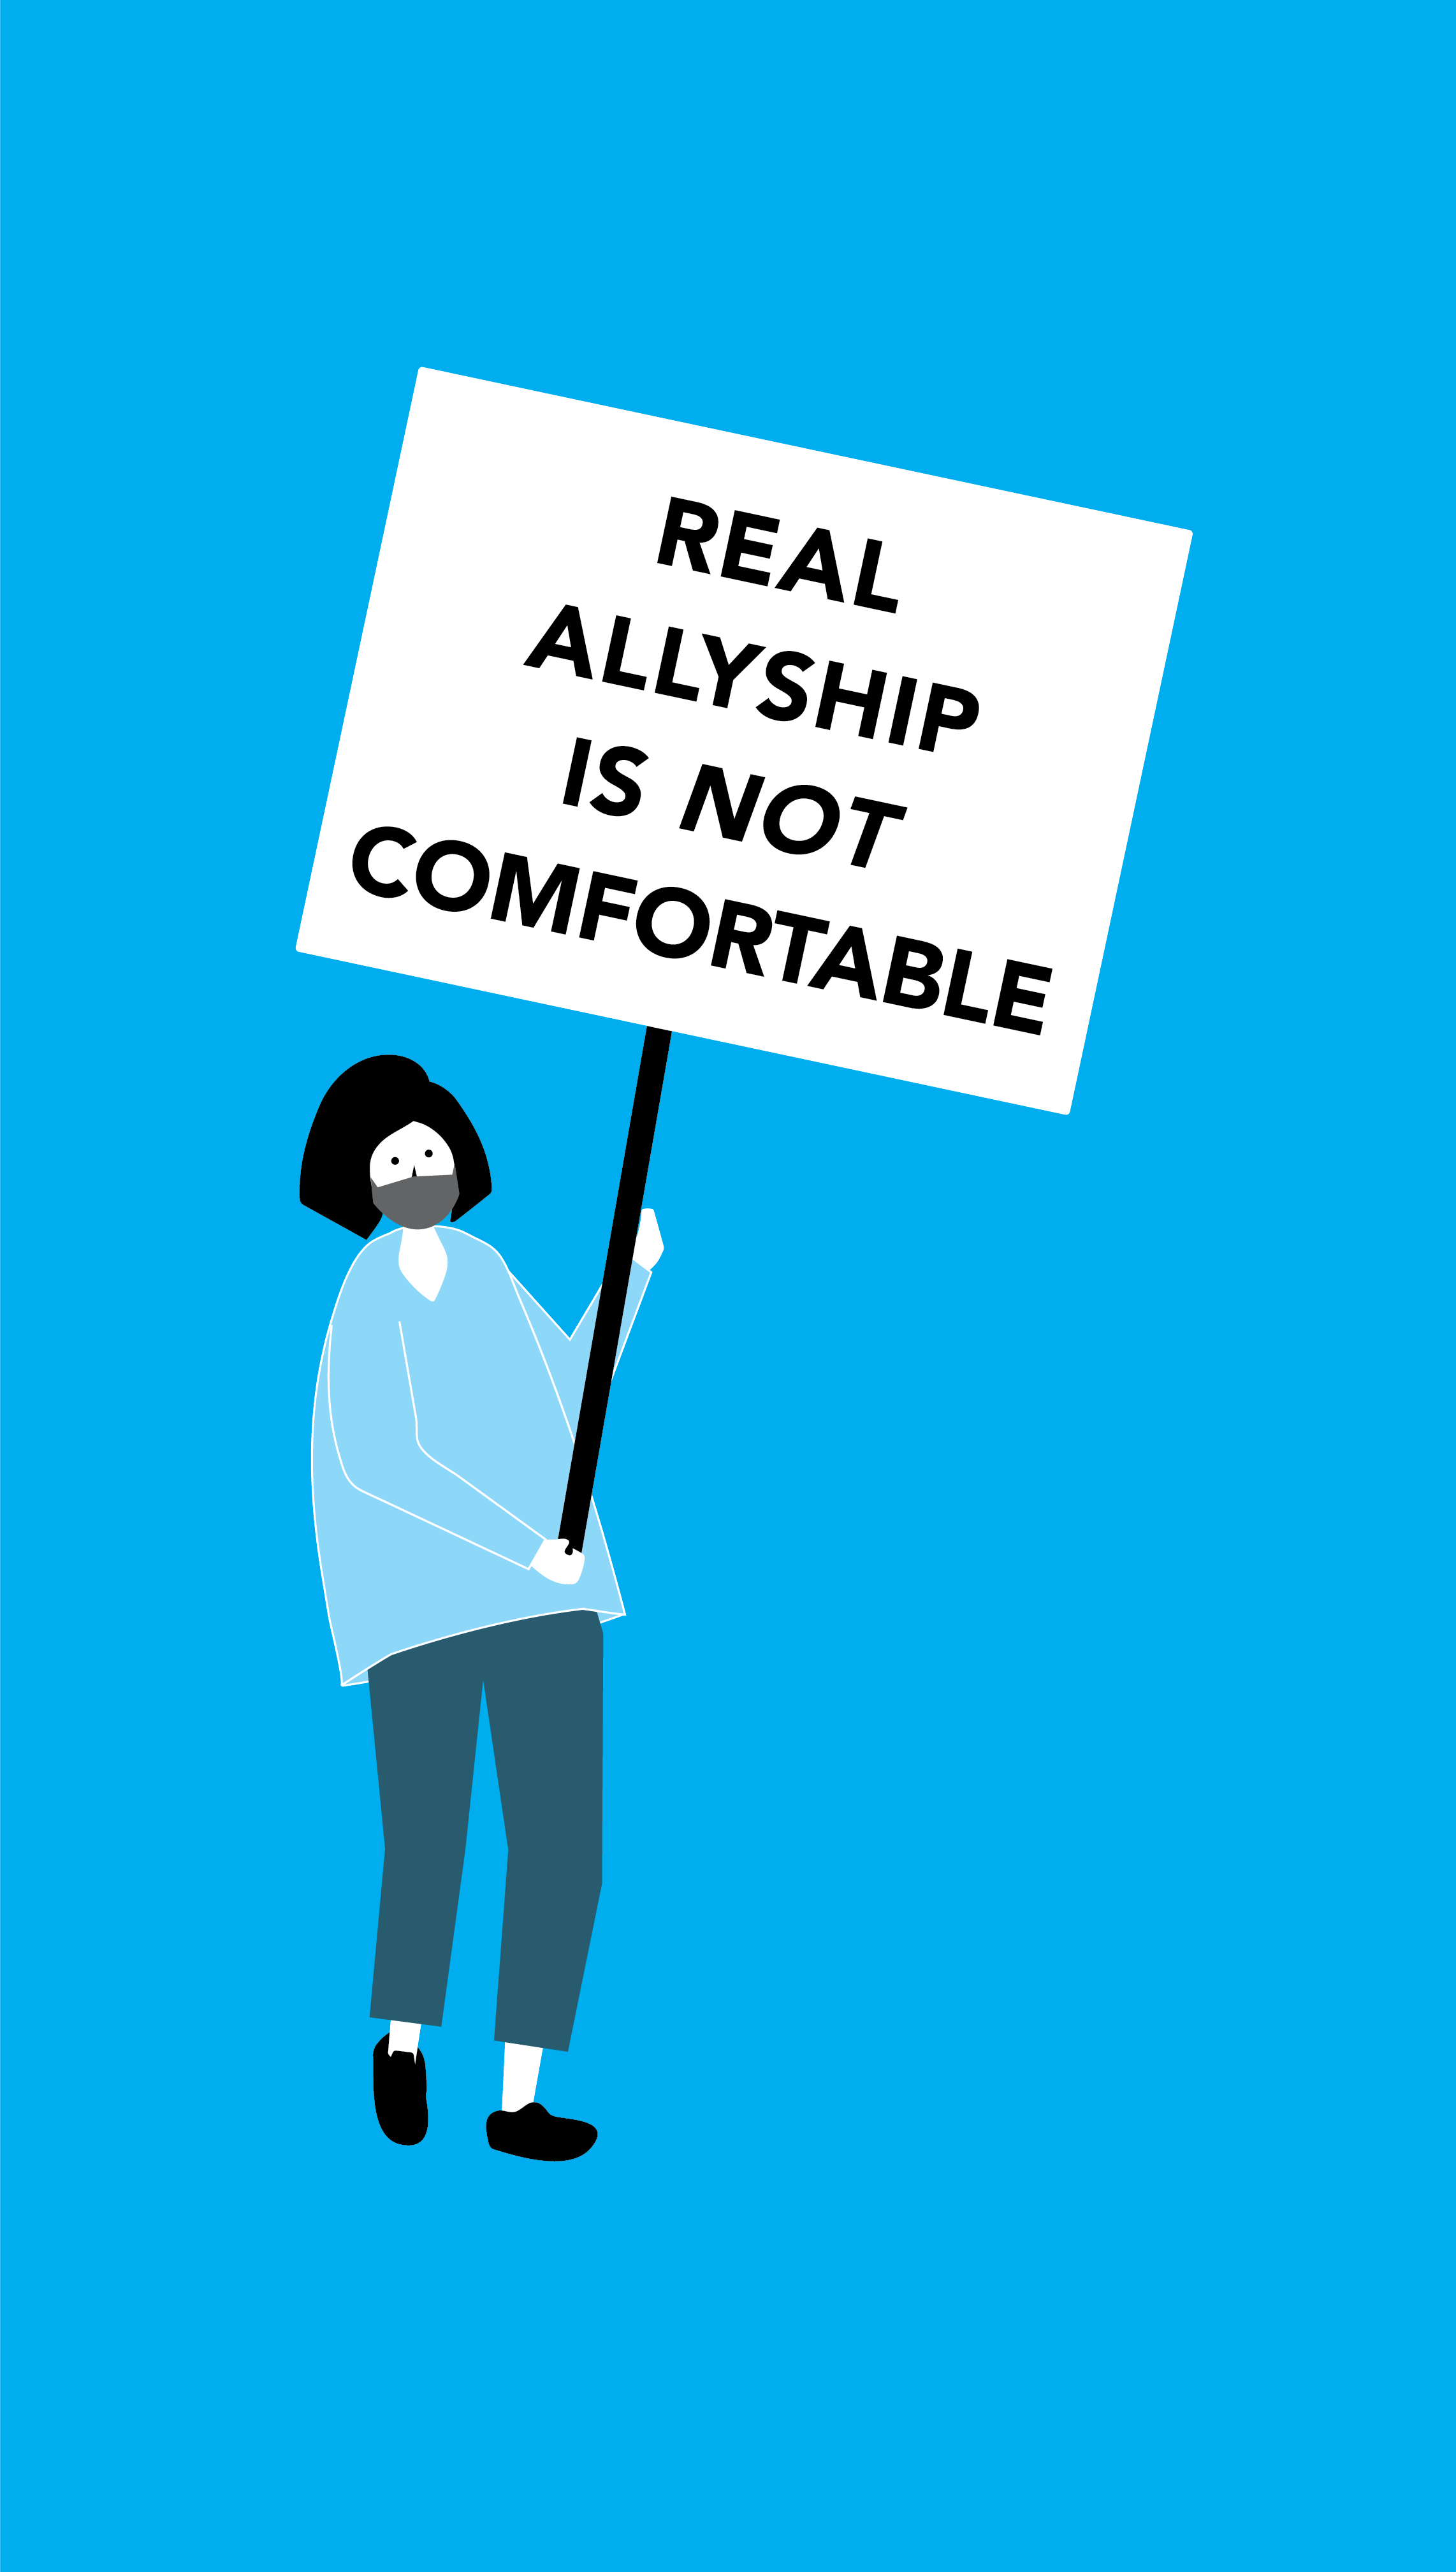 Real allyship is not comfortable